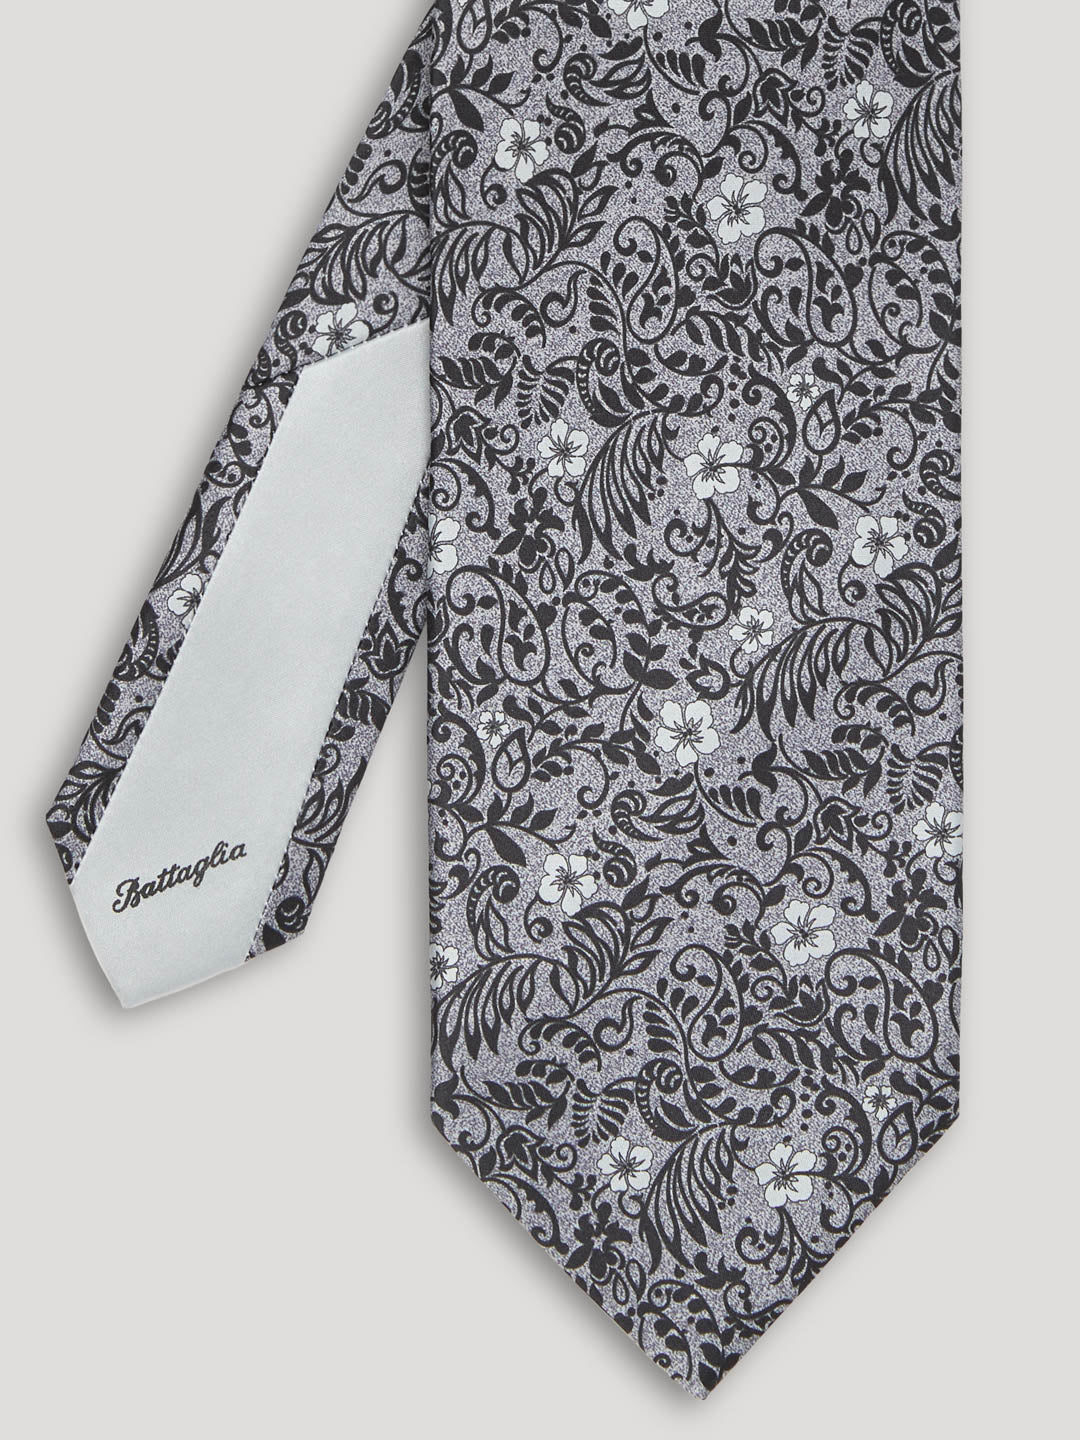 Black and silver floral tie. 